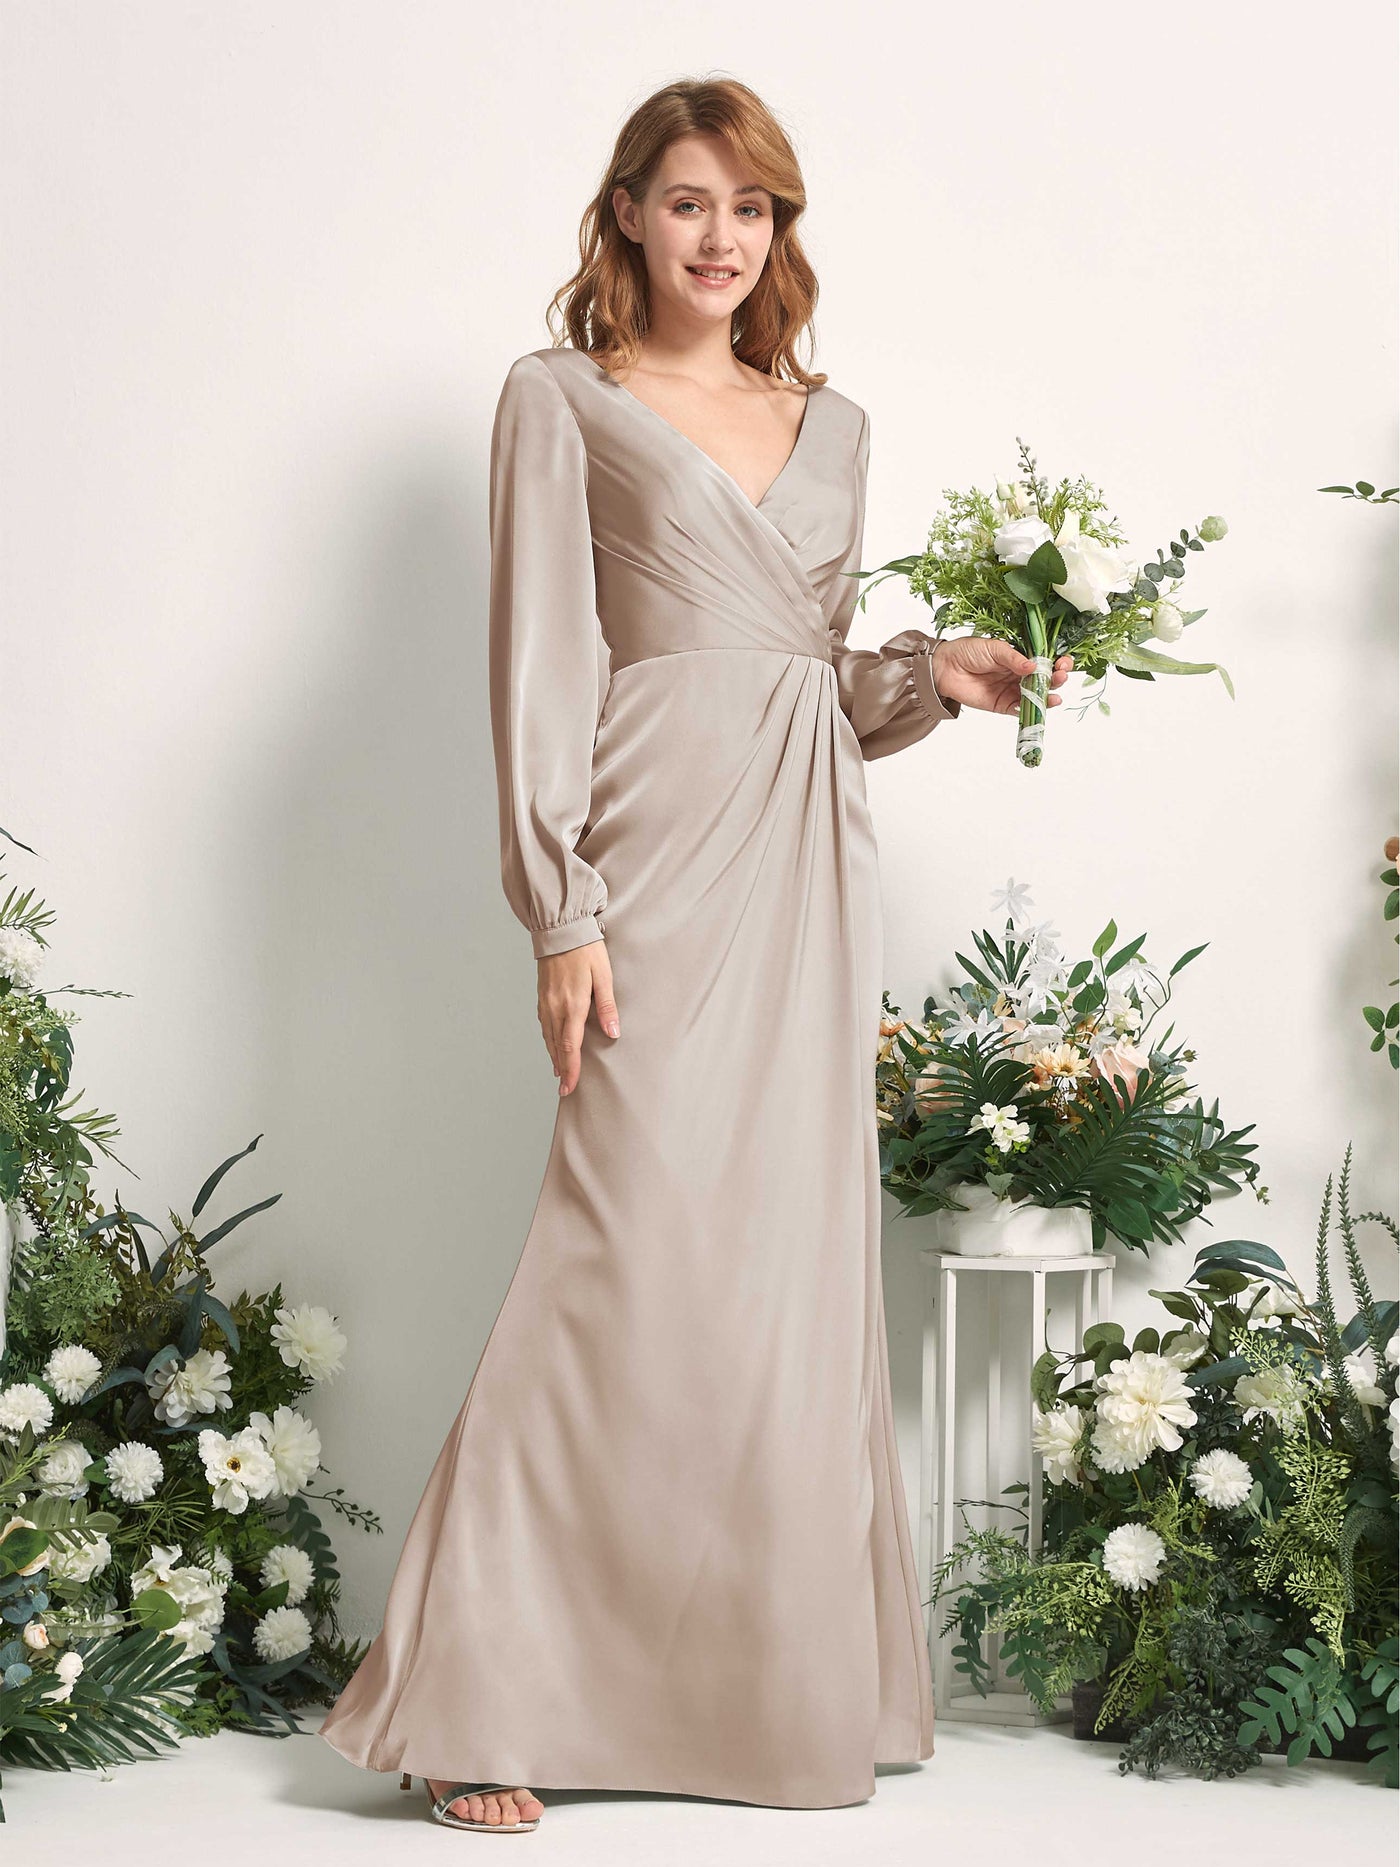 Taupe Bridesmaid Dresses Bridesmaid Dress Ball Gown Satin V-neck Full Length Long Sleeves Wedding Party Dress (80225102)#color_taupe